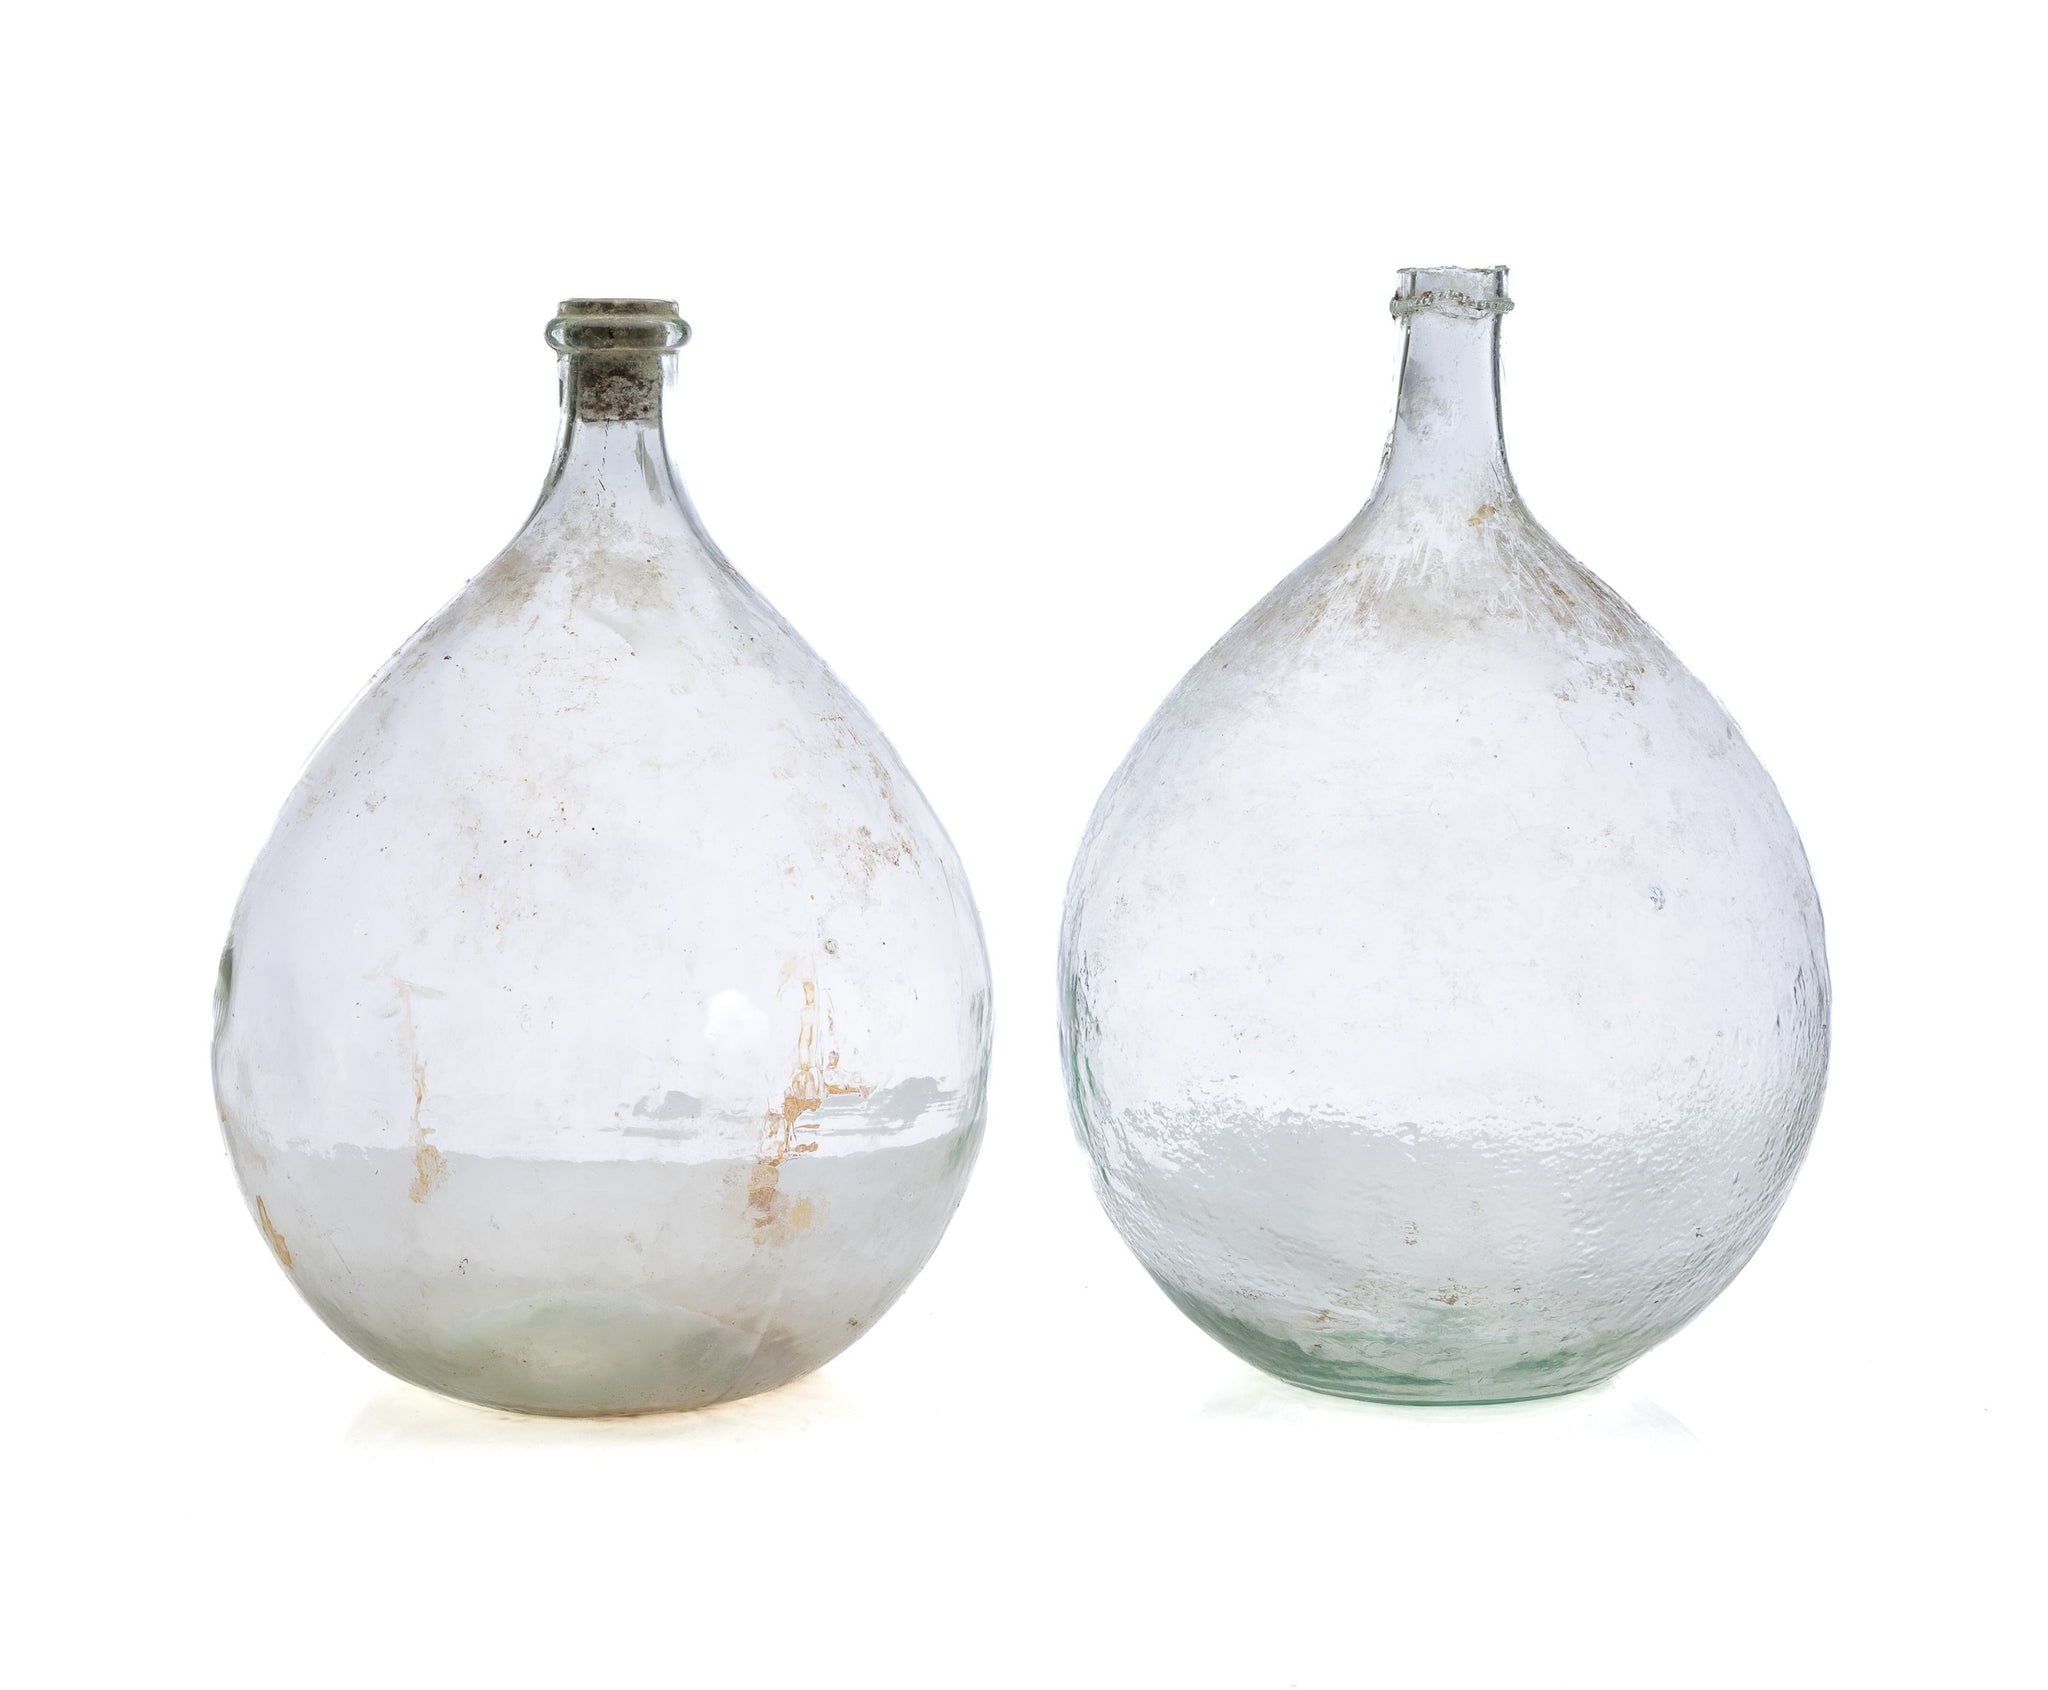 A pair of large vintage clear demijohn glass wine bottles from Bonnieux in Provence